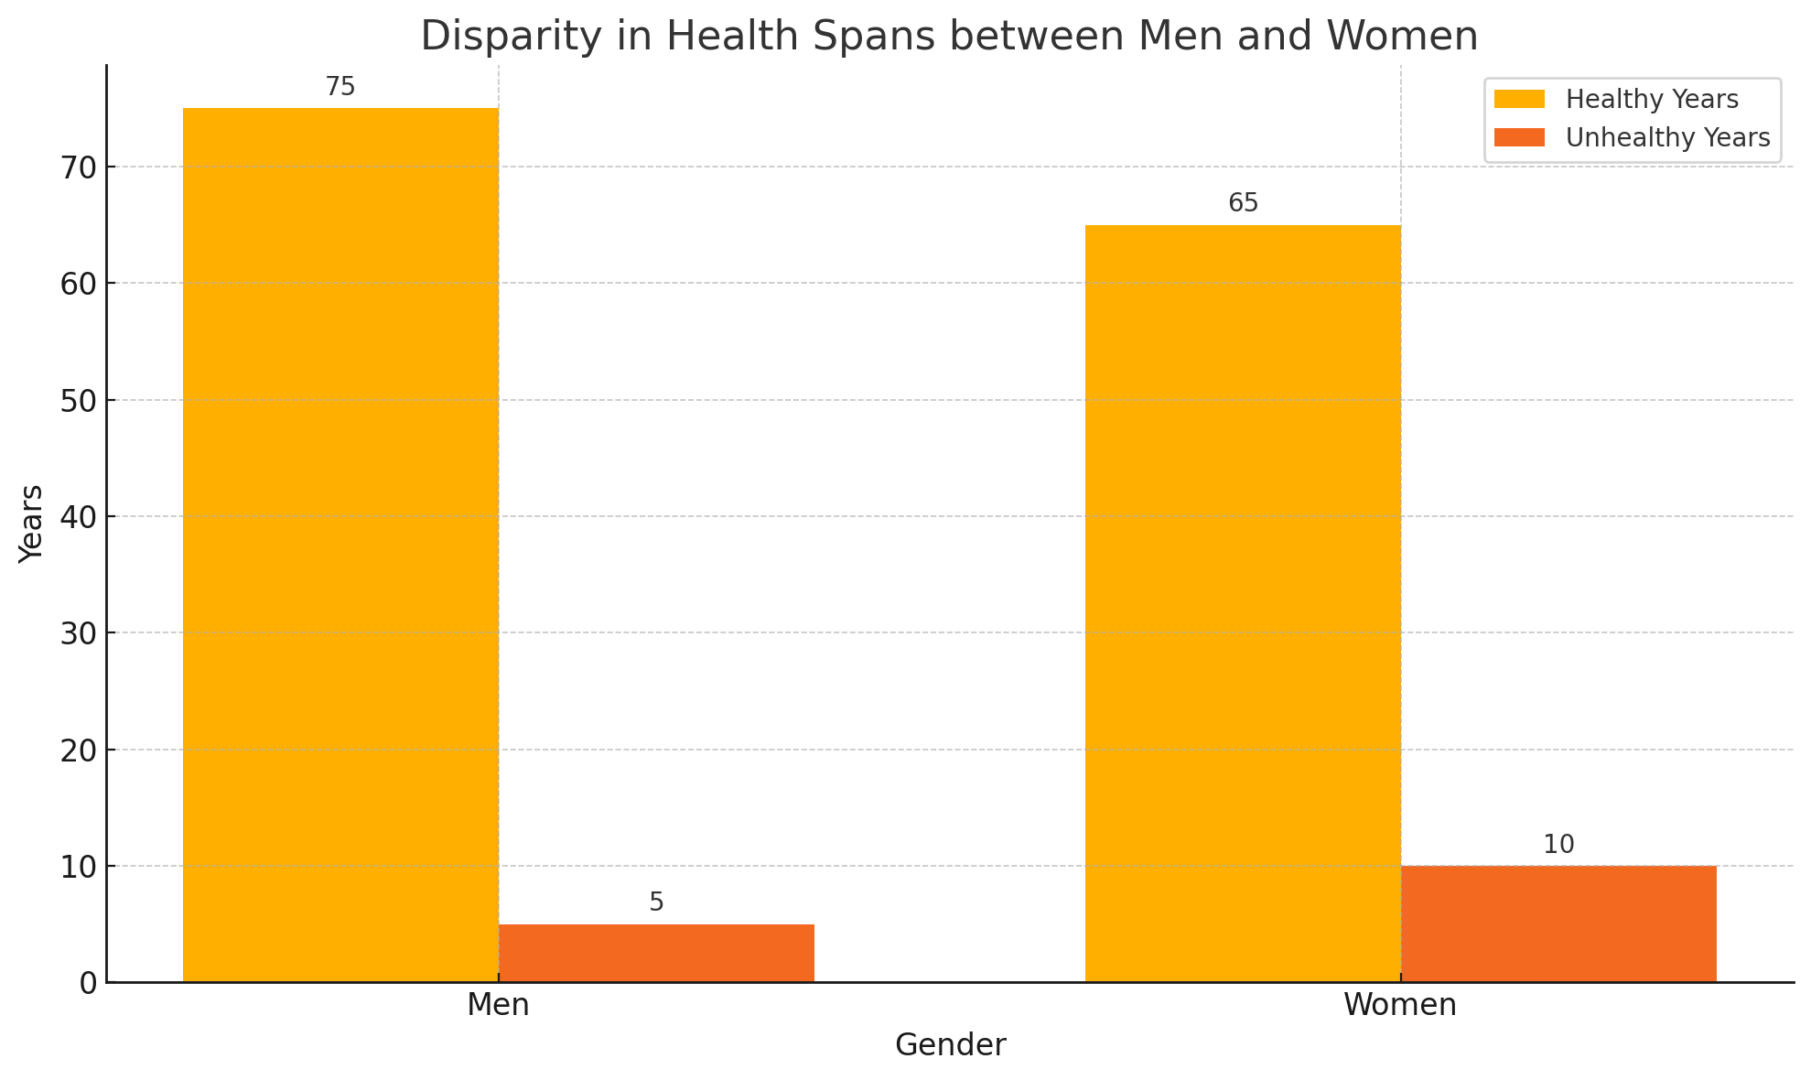 Bar chart showing the disparity in health spans between men and women. Men have 75 healthy years and 5 unhealthy years, while women have 65 healthy years and 10 unhealthy years, illustrating that women spend 25% more of their lives in poor health compared to men.